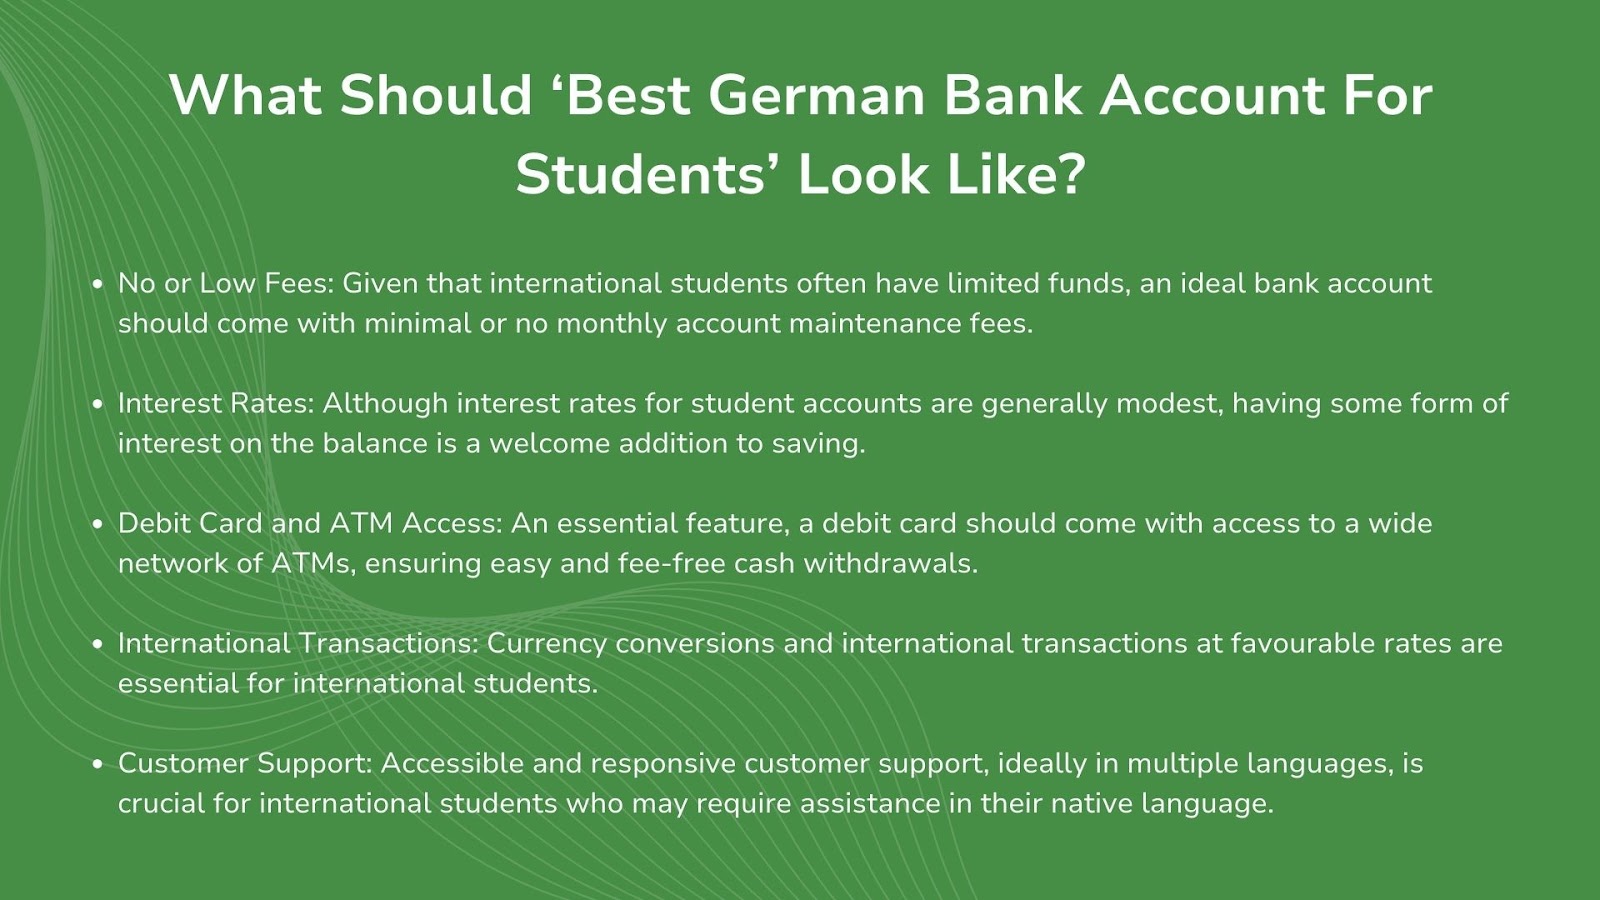 Things best German bank accounts for international students have